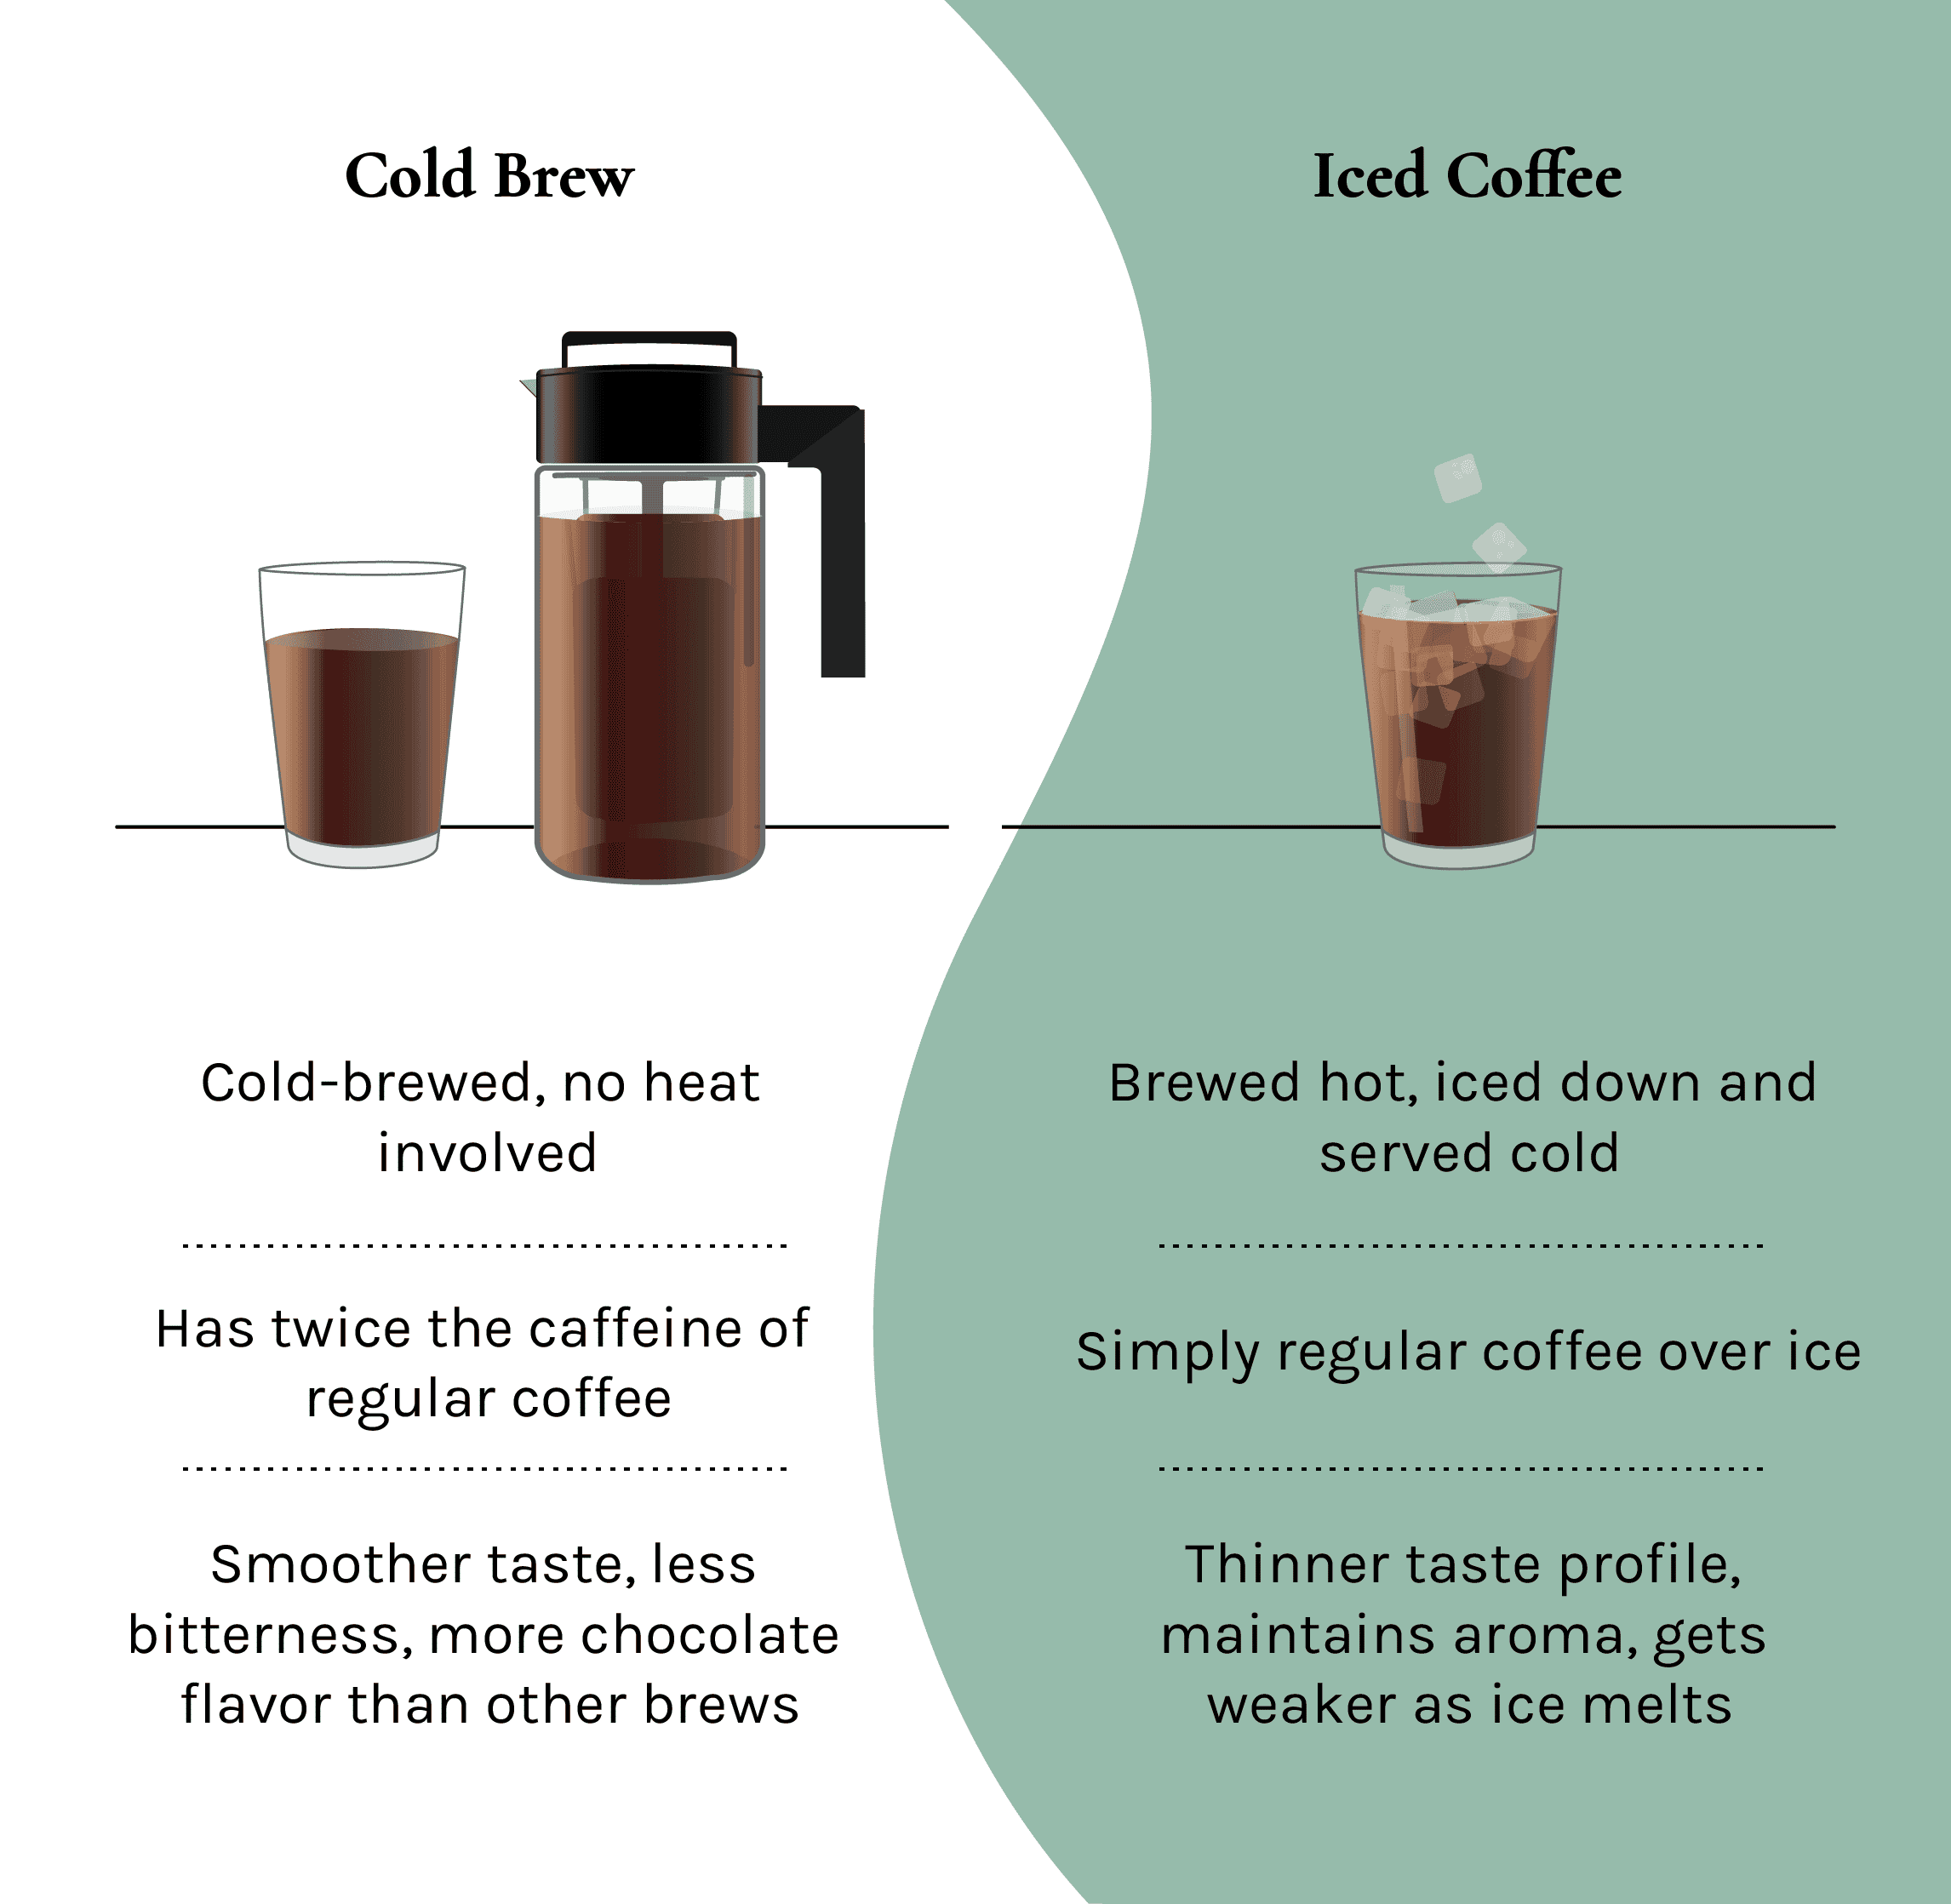 Cold Brew vs Iced Coffee: What